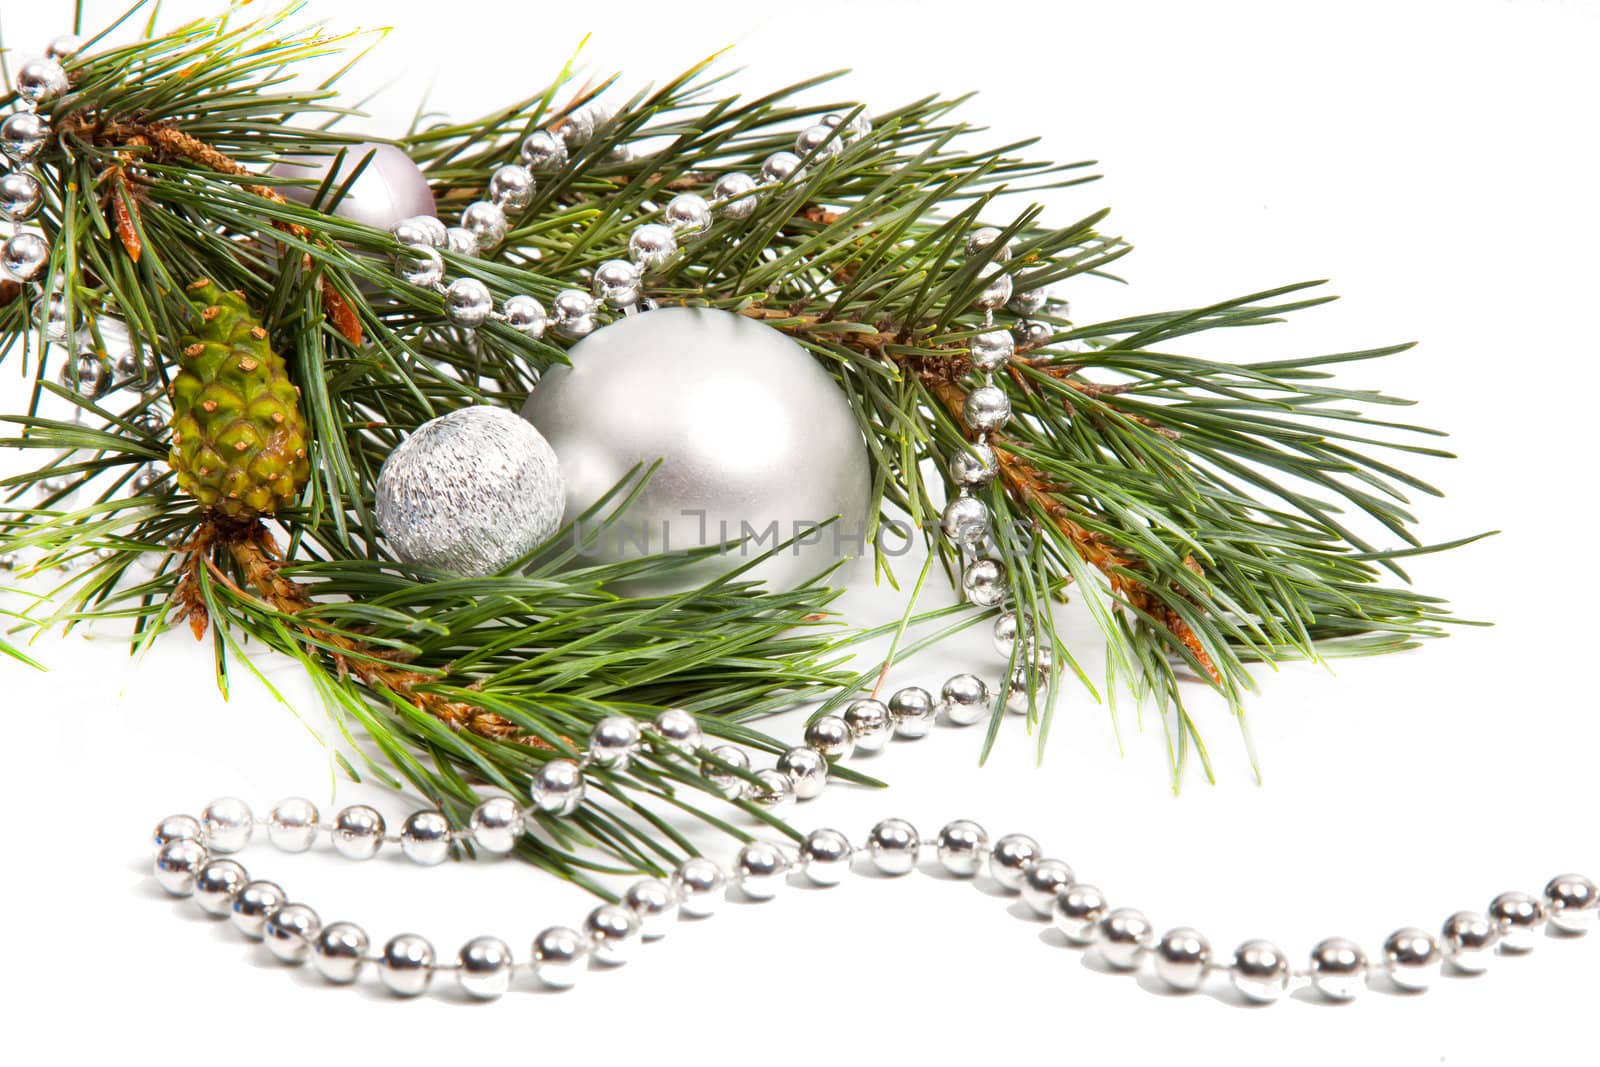 Green spruce twig with Christmas balls and decoration isolated on white